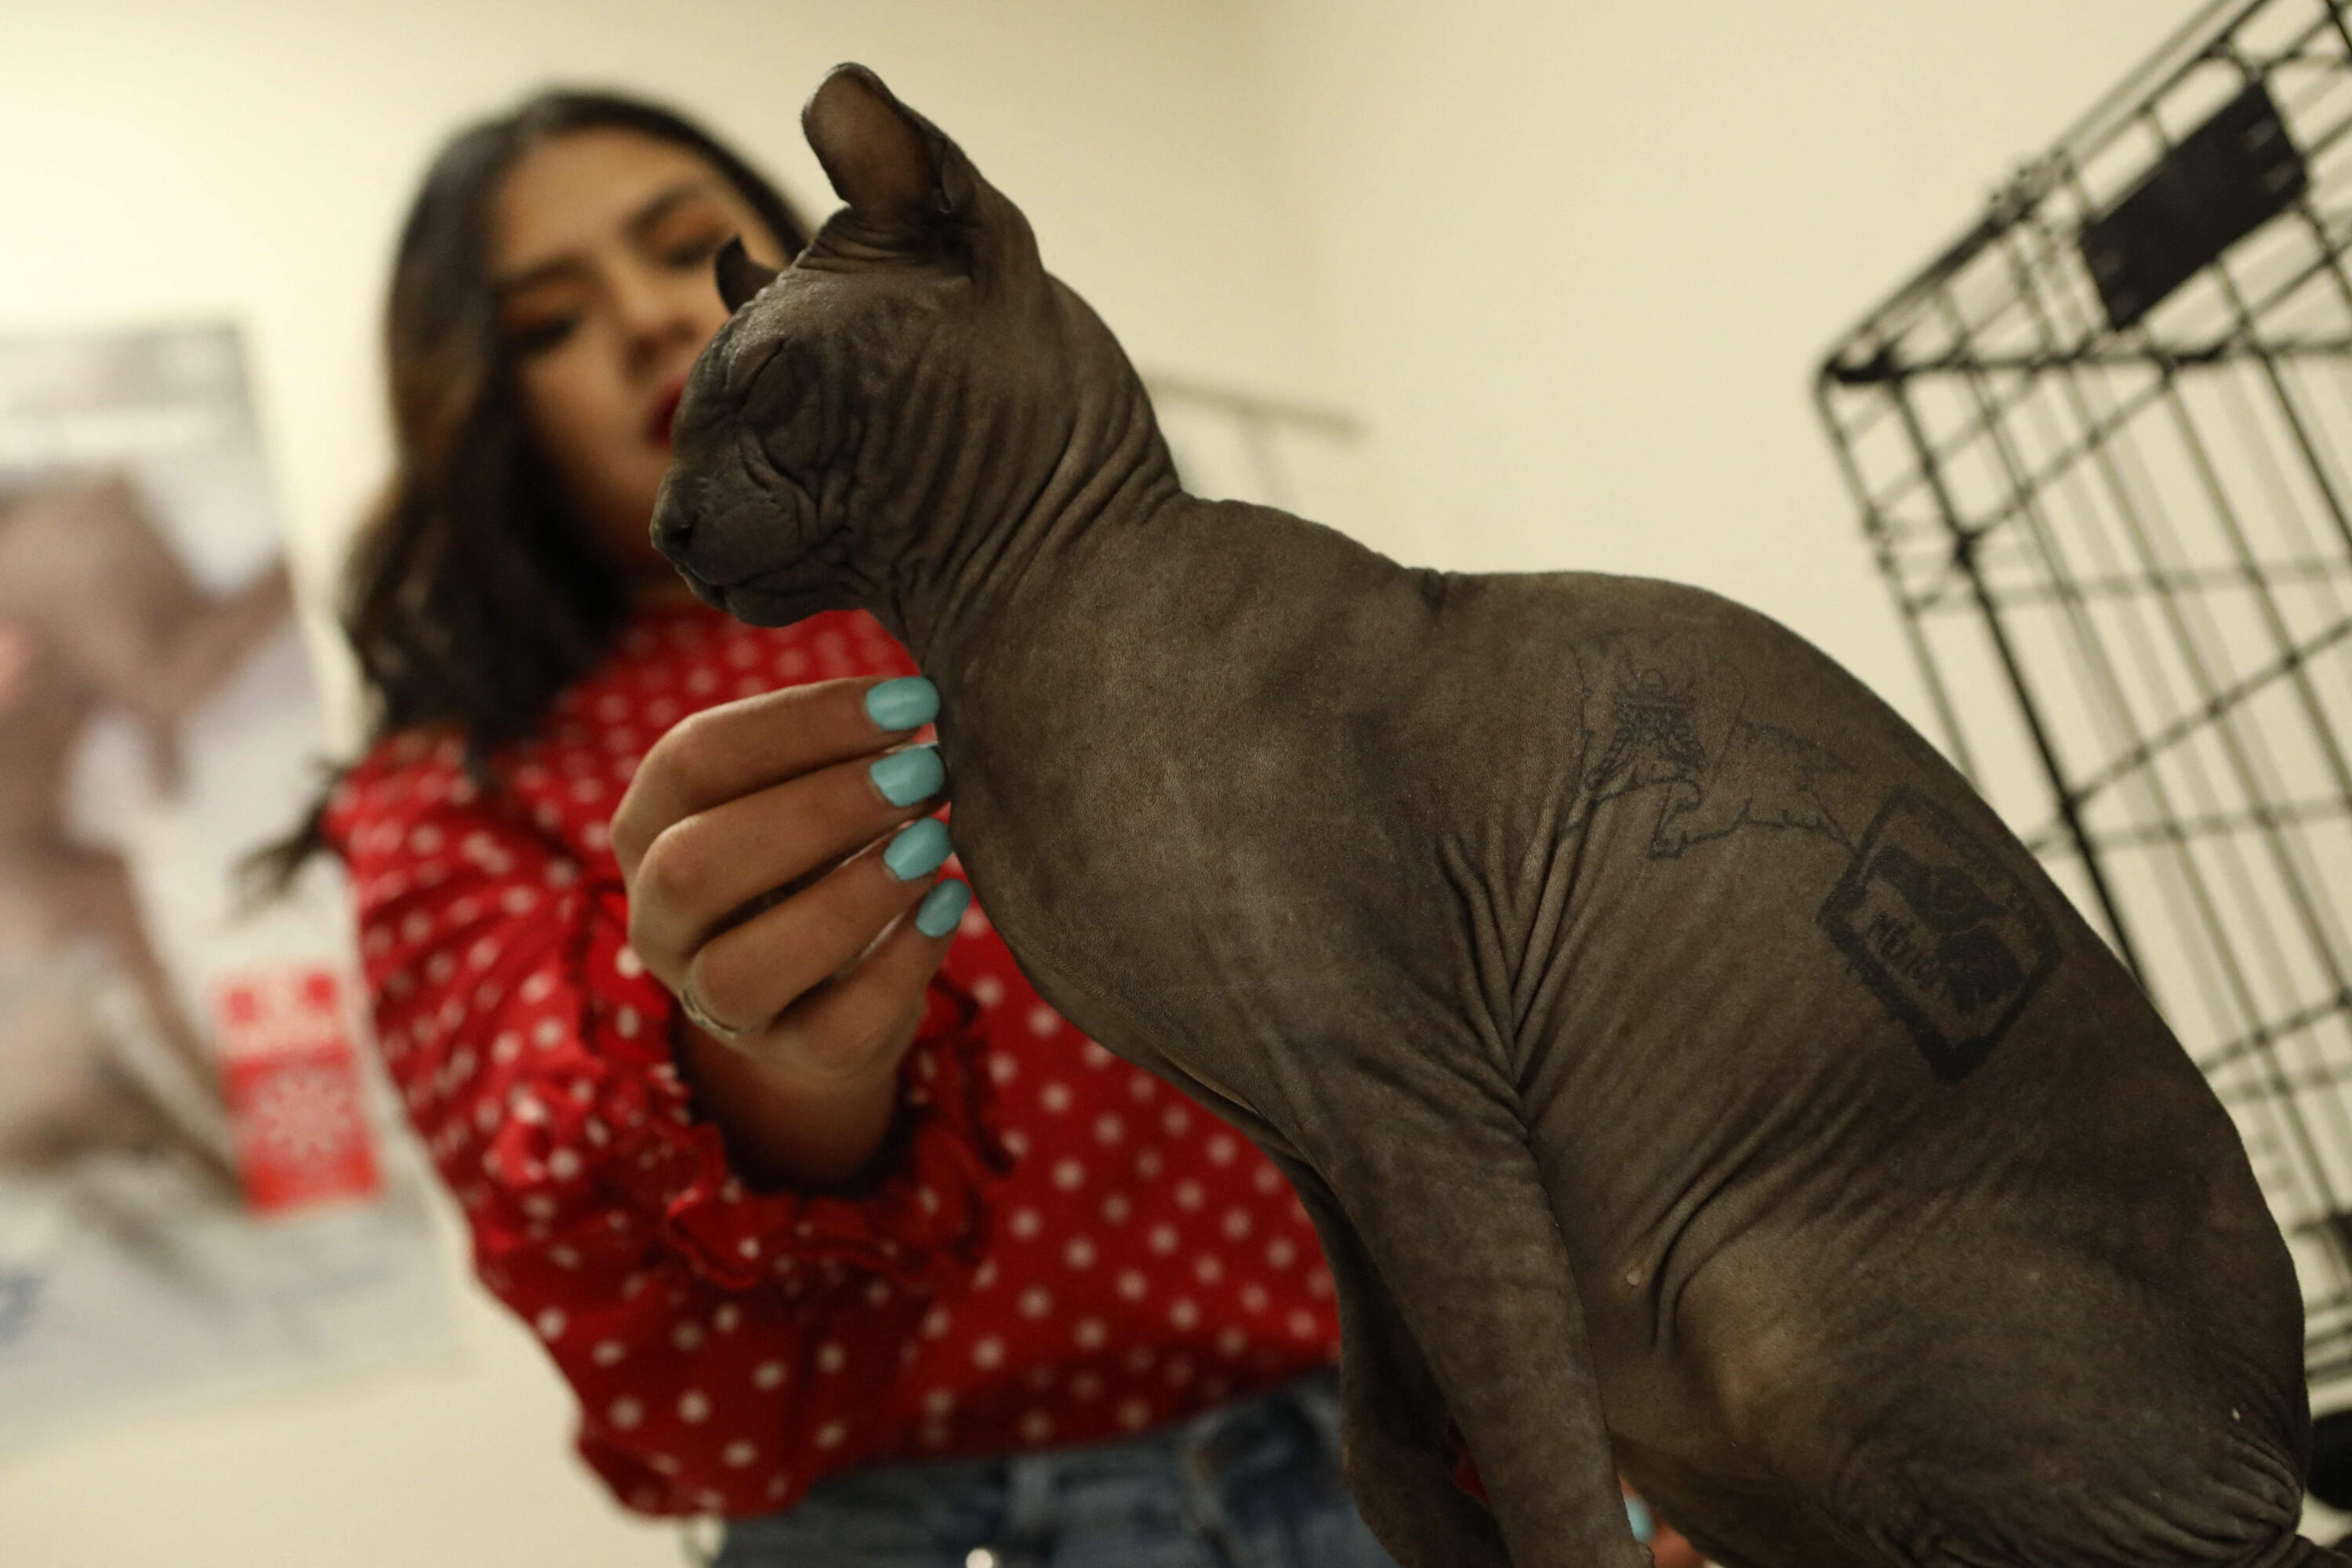 Tattooed Mexican cat seeks new home after life behind bars  Life